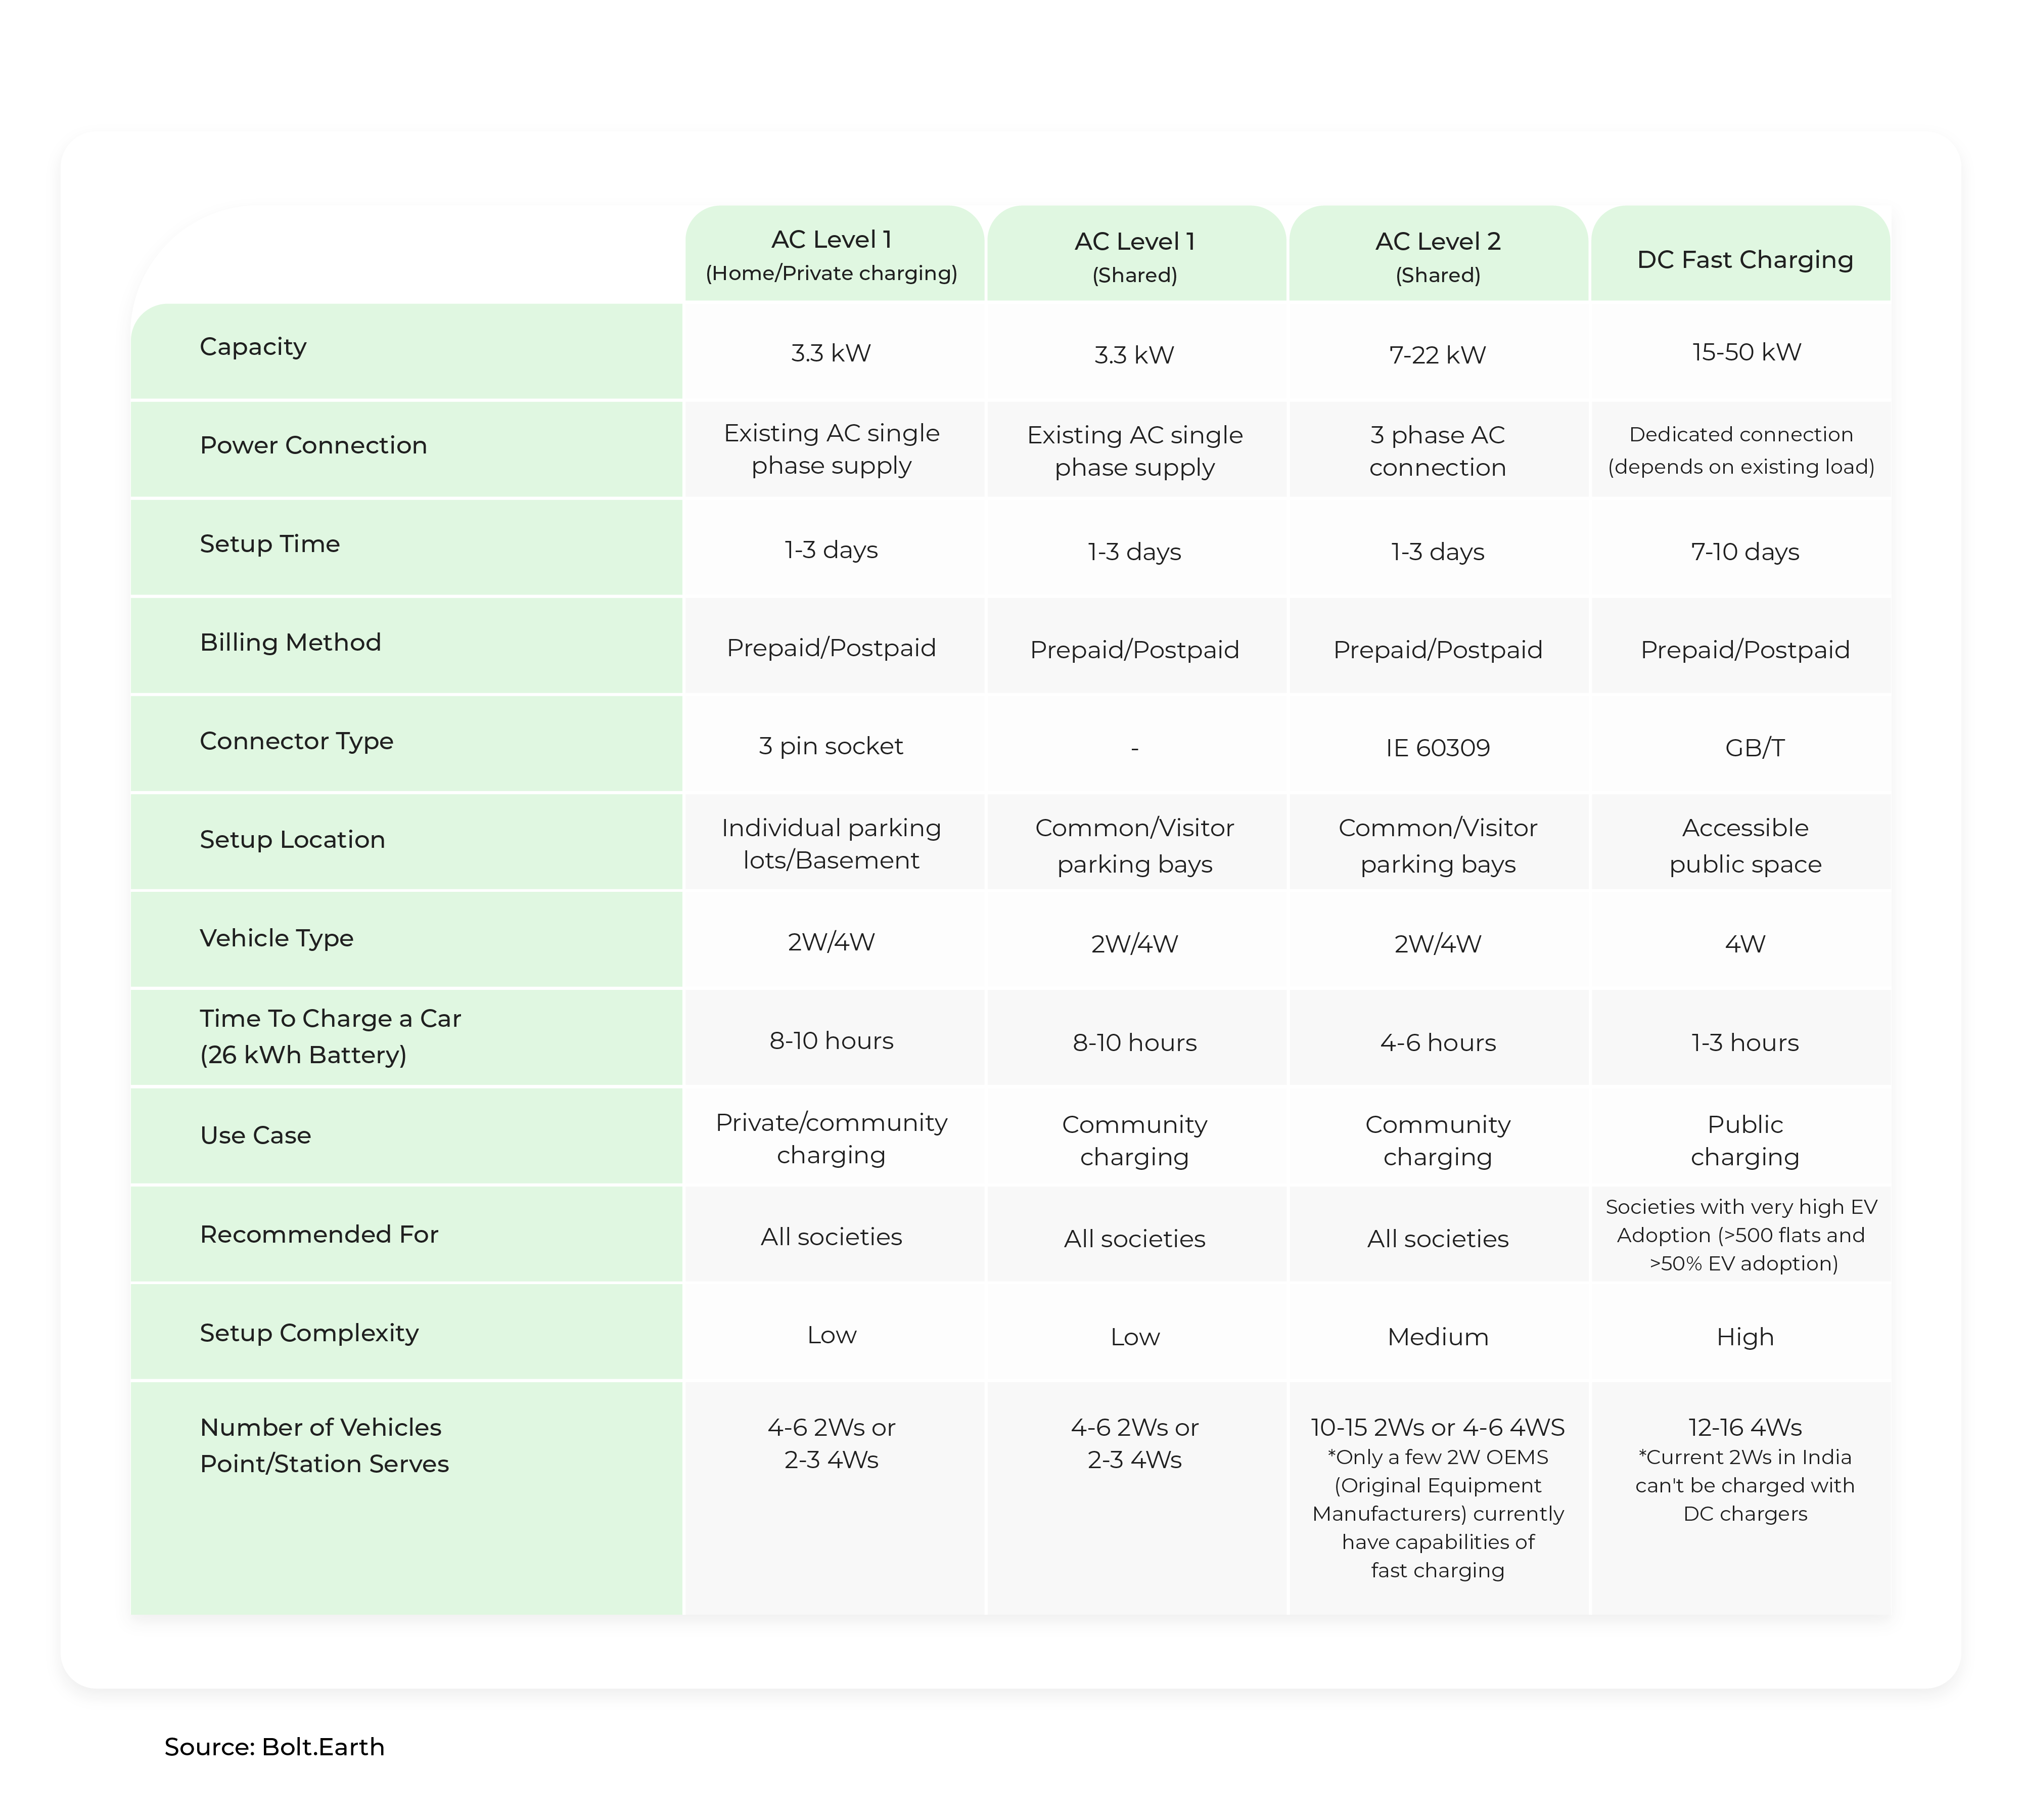 Table of the different types of charging points available and their setup details.